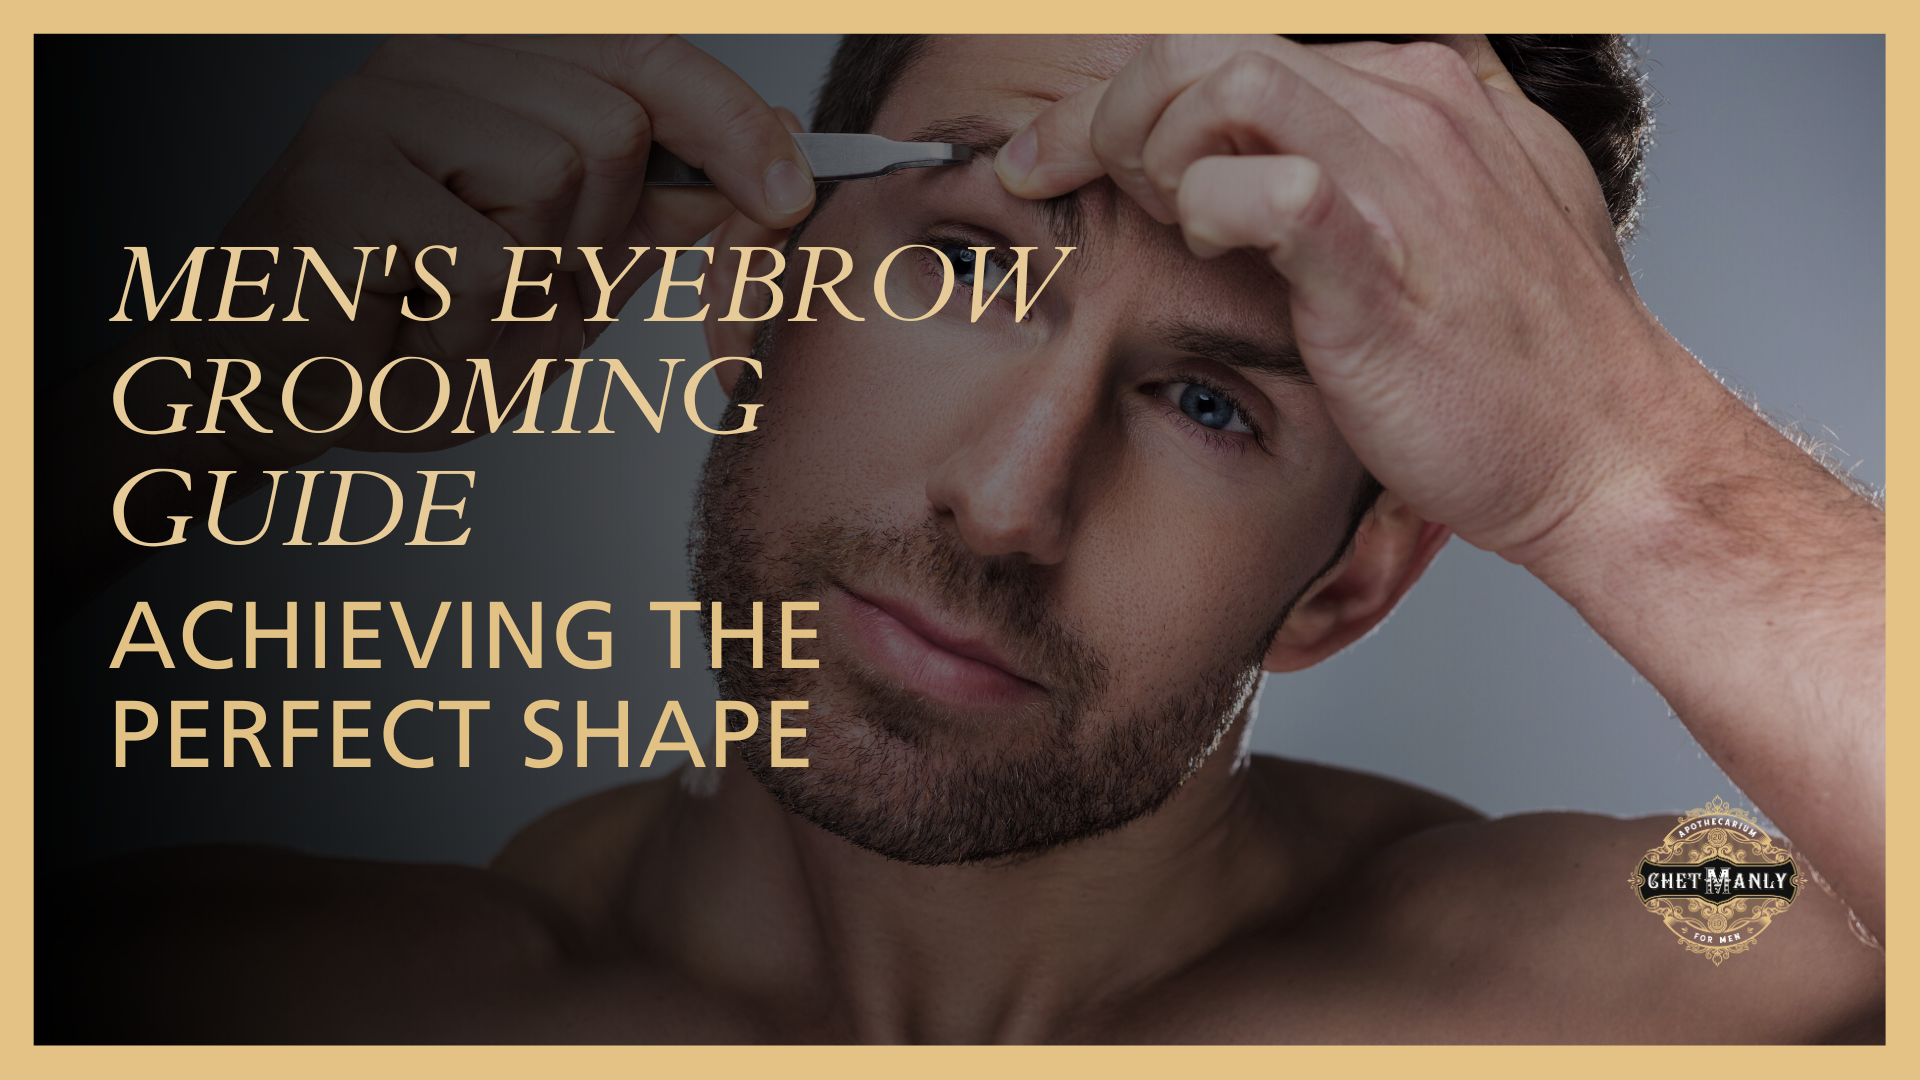 Men's Eyebrow Grooming Guide: Achieving the Perfect Shape